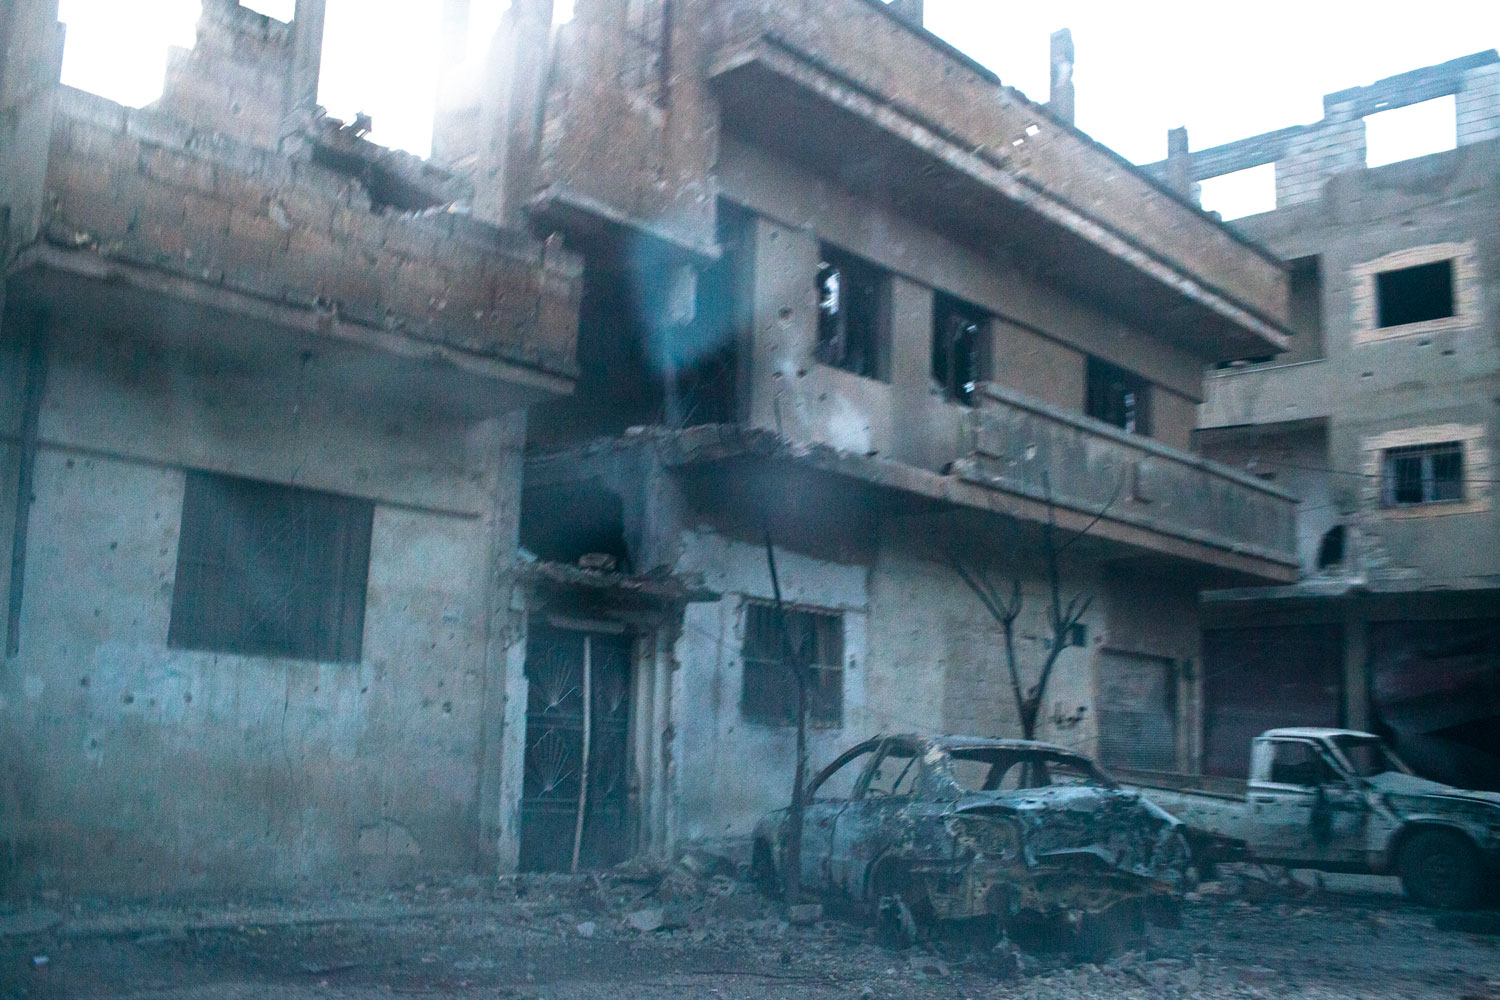 Feb. 24, 2012. The destruction in Bab Amr, captured from a moving car.